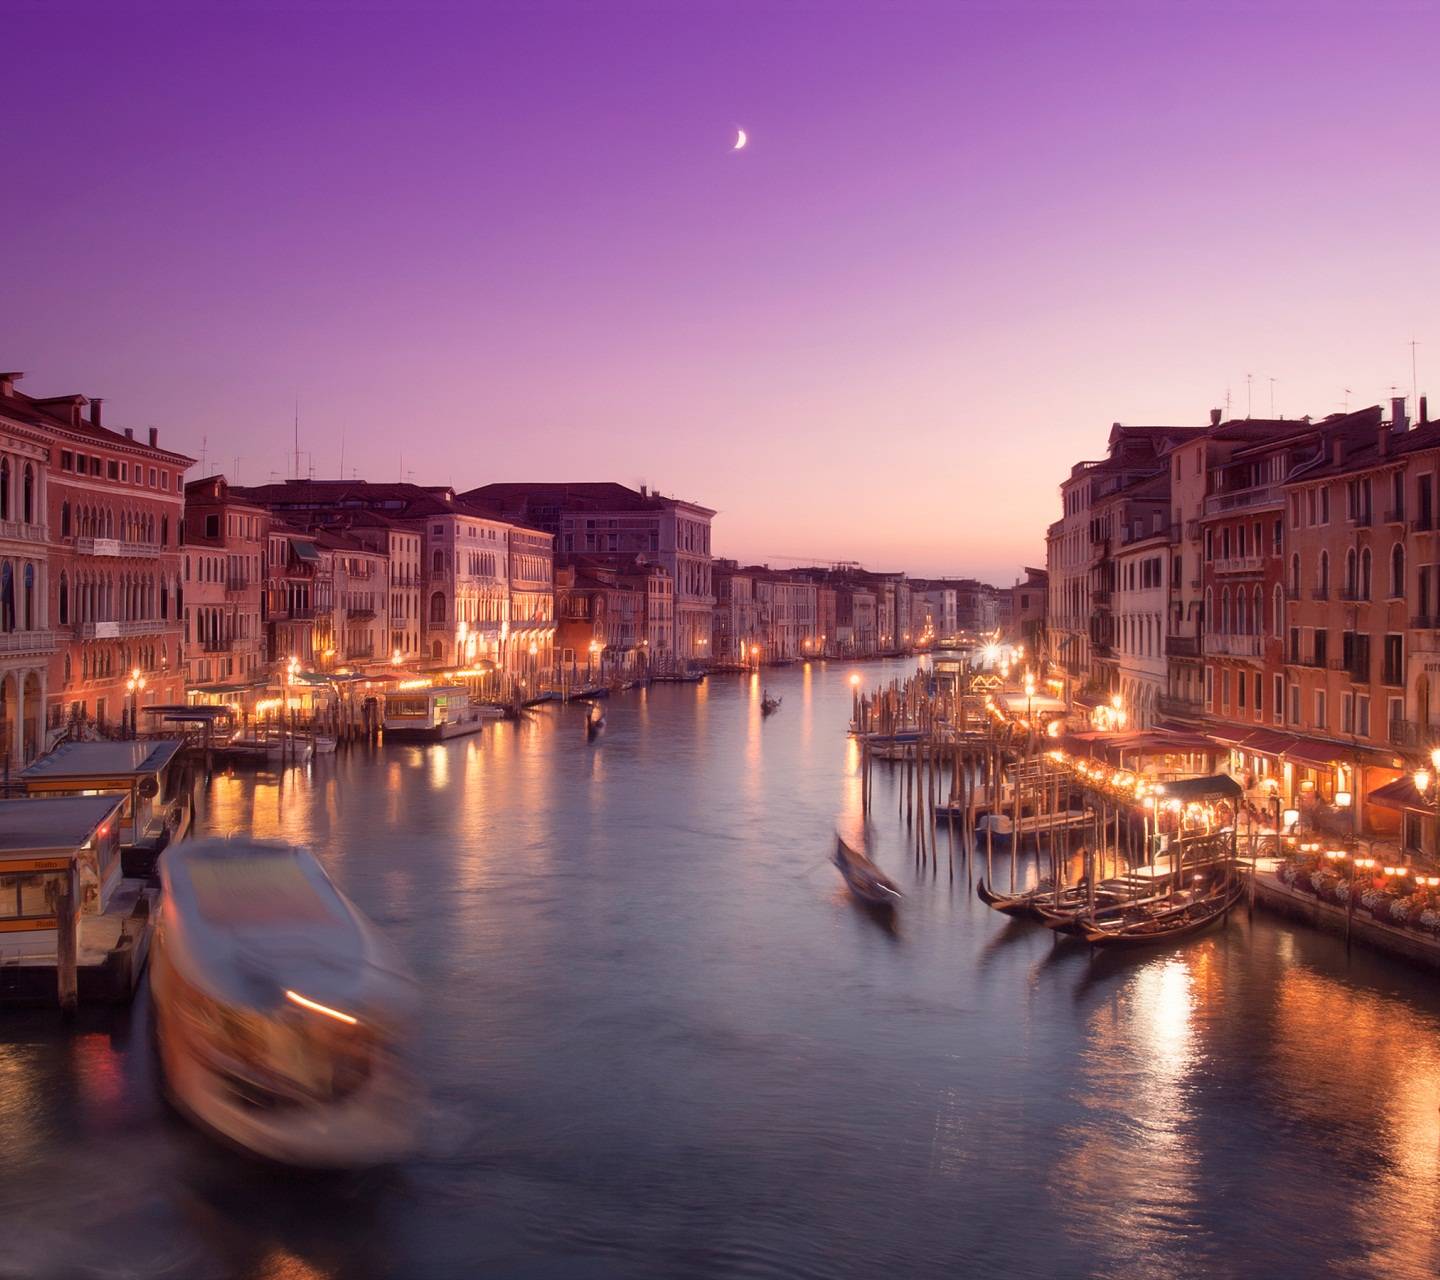 Venice Night Wallpapers - Top Free Venice Night Backgrounds ...